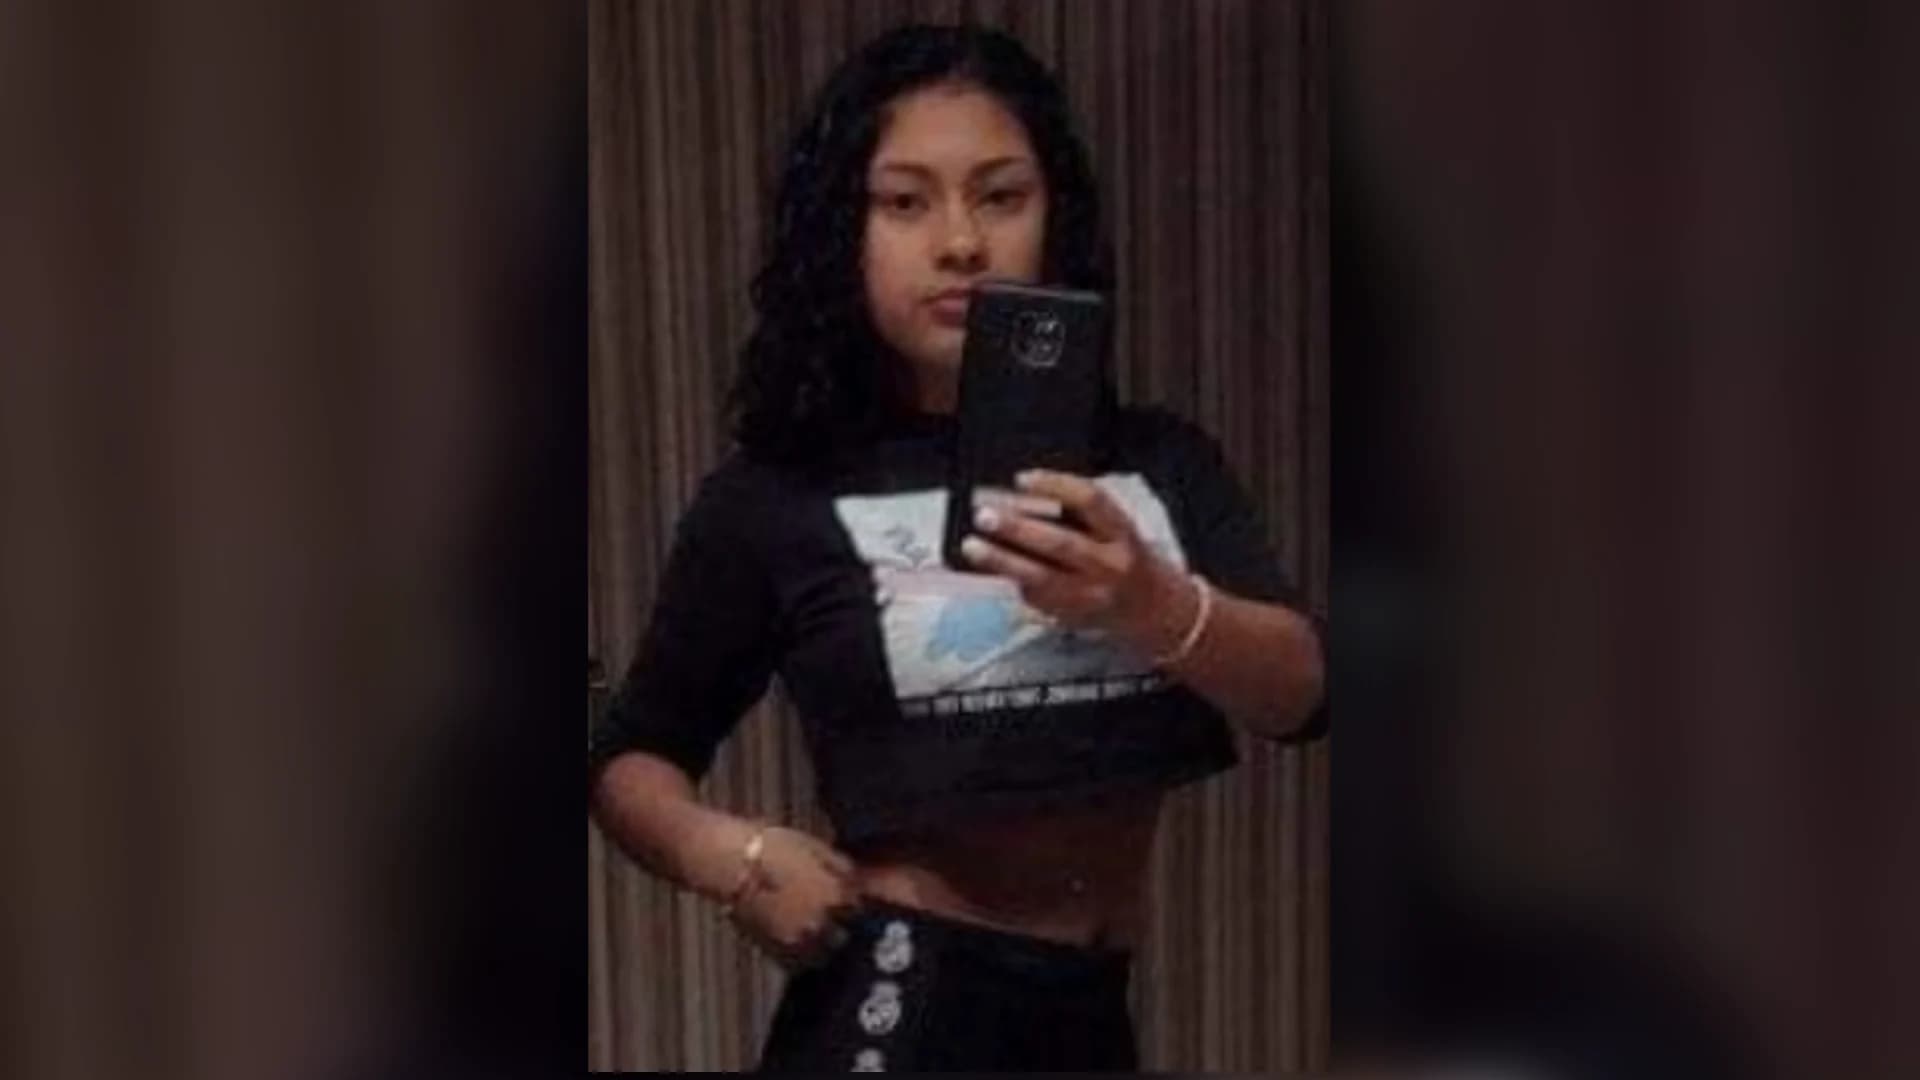 Police ask for public's help finding missing Connecticut teen  